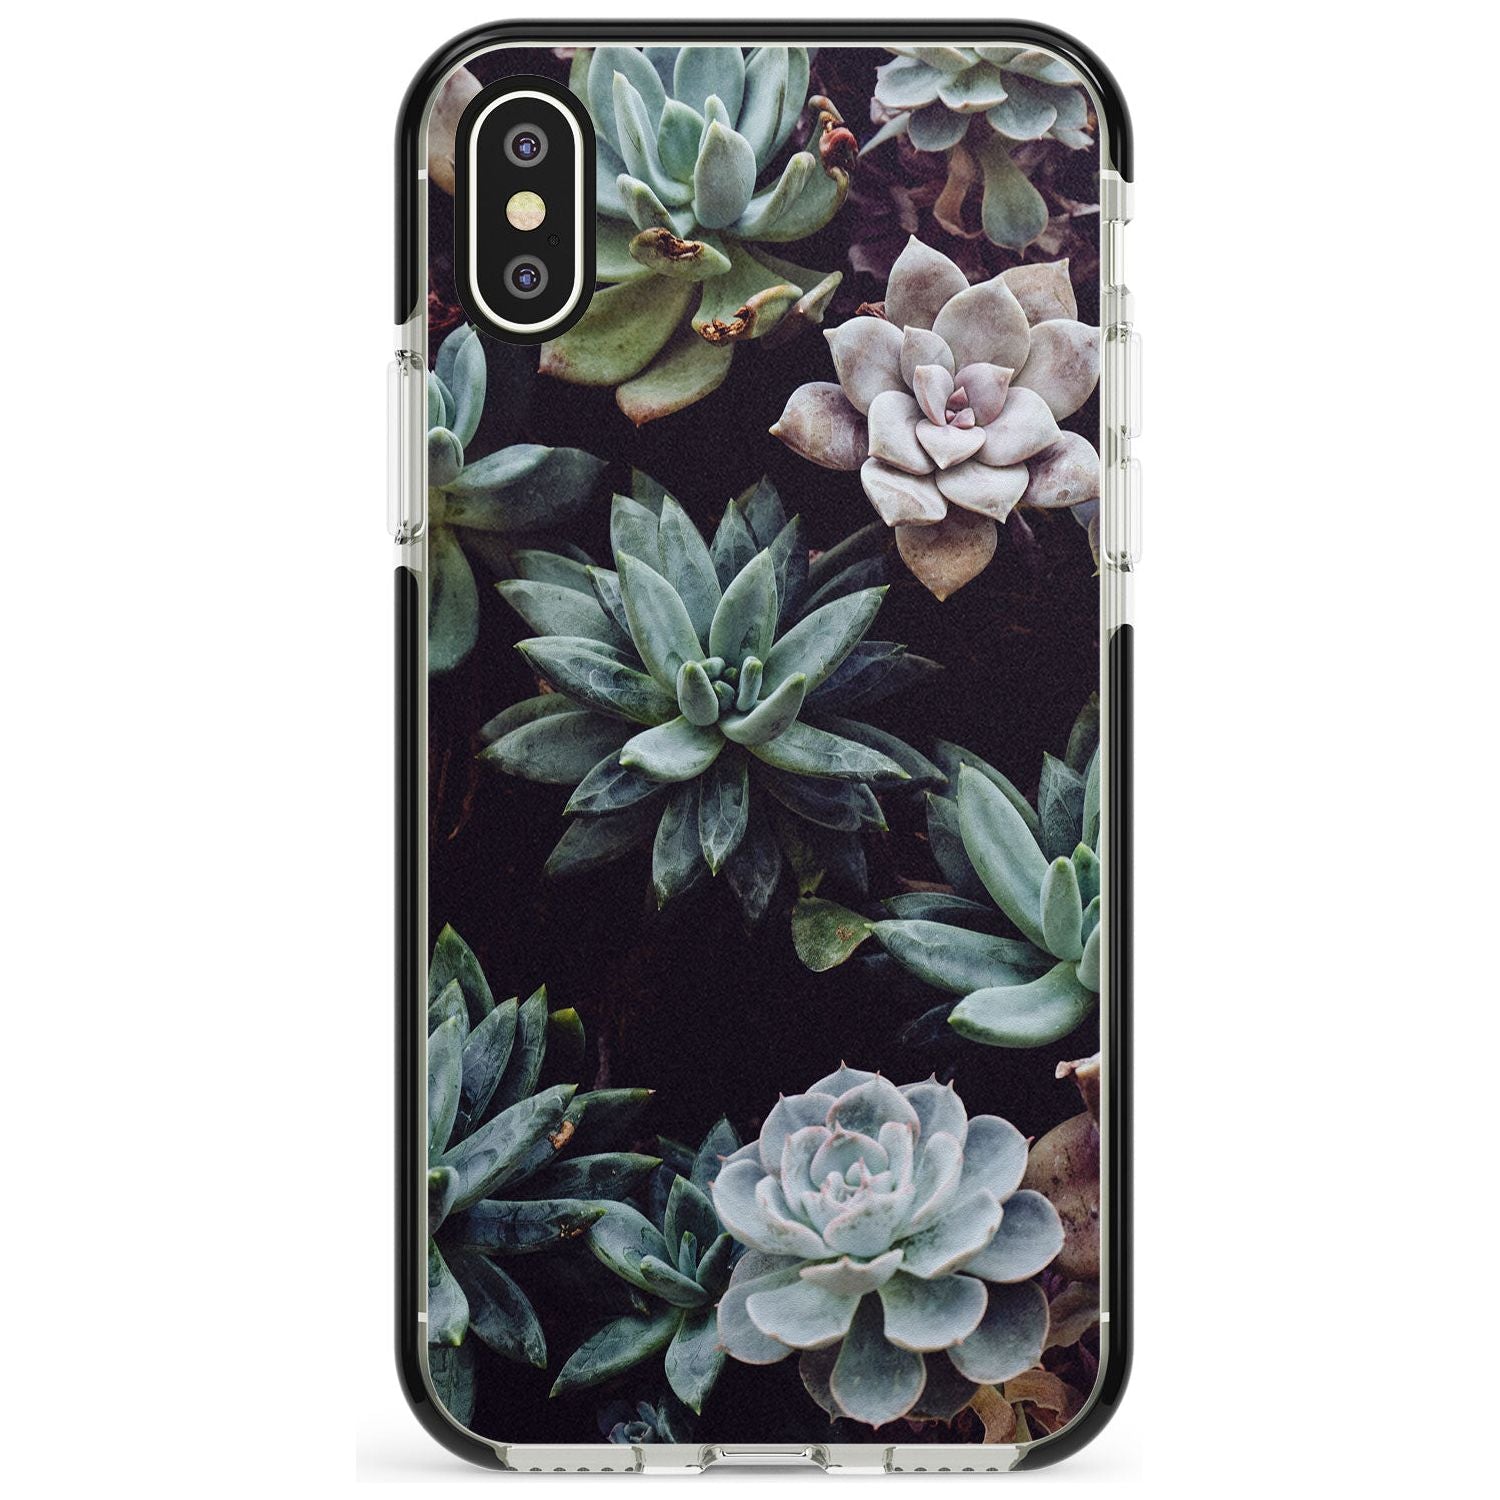 Mixed Succulents - Real Botanical Photographs Black Impact Phone Case for iPhone X XS Max XR